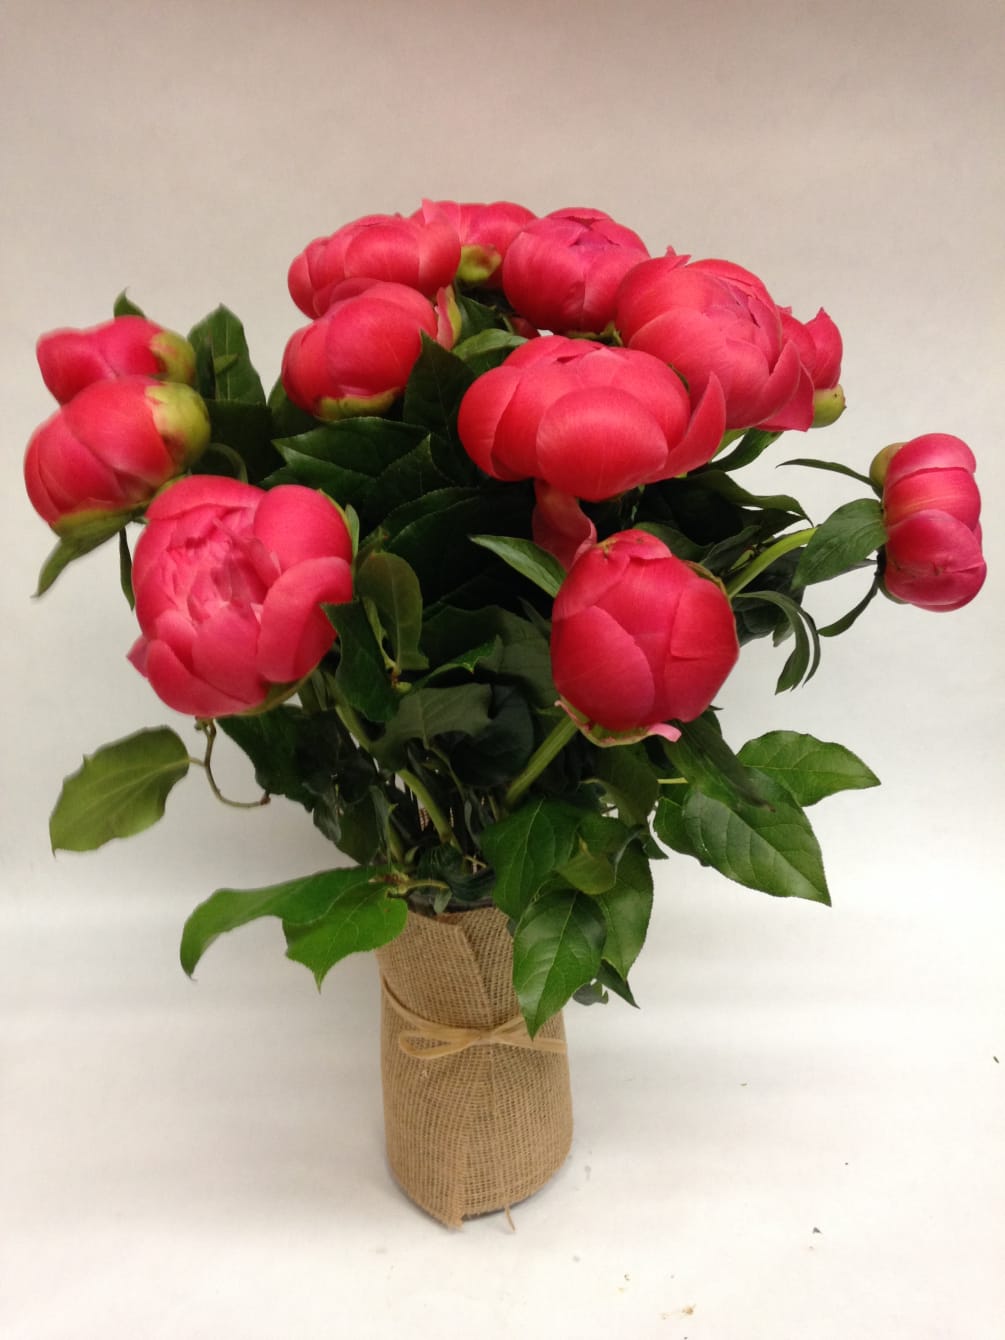 12 stems of gorgeous peonies in a medium sized vase wrapped with